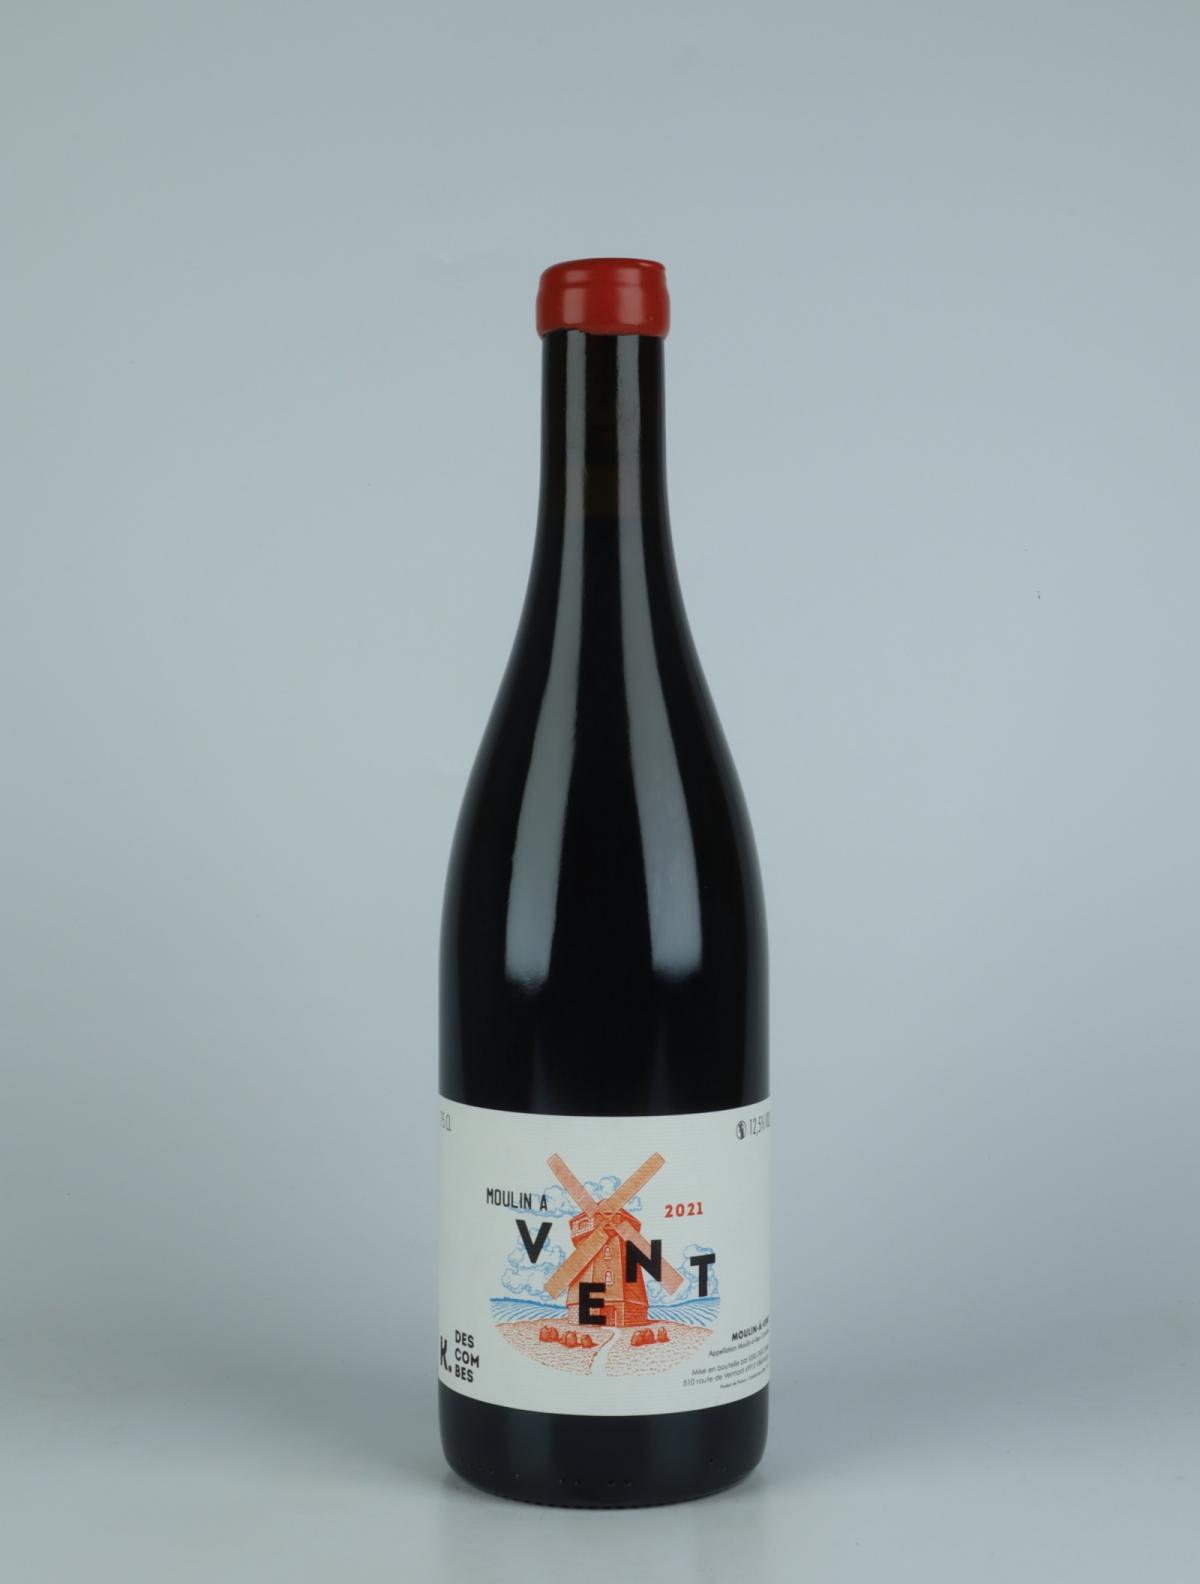 A bottle 2021 Moulin à Vent Red wine from Kewin Descombes, Beaujolais in France